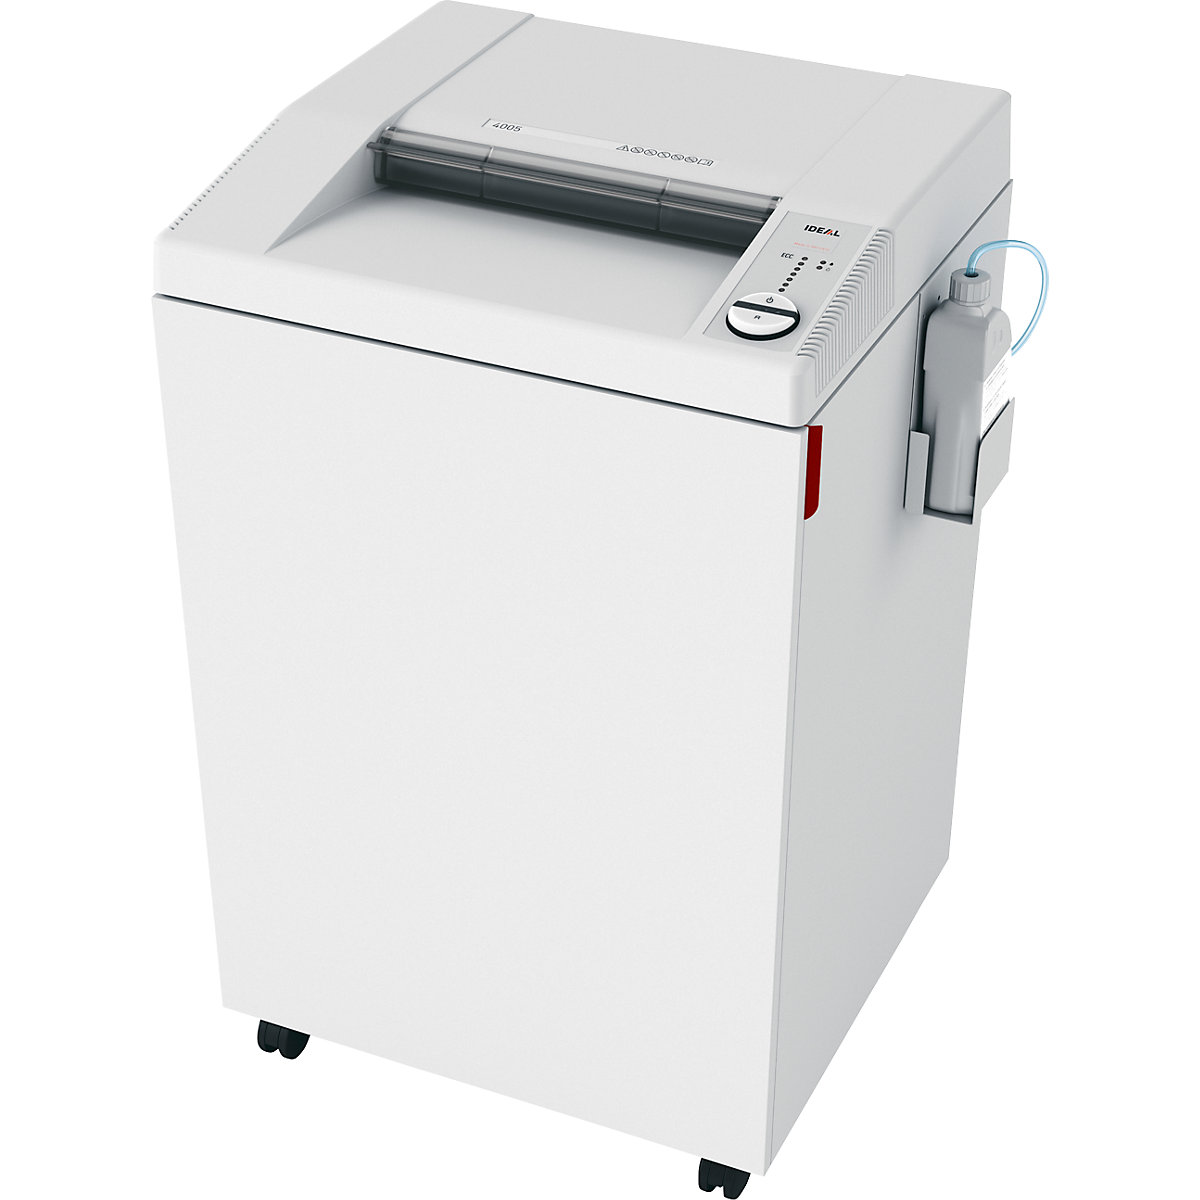 IDEAL – Document shredder 4005, container capacity 165 l, particles, 2 x 15 mm